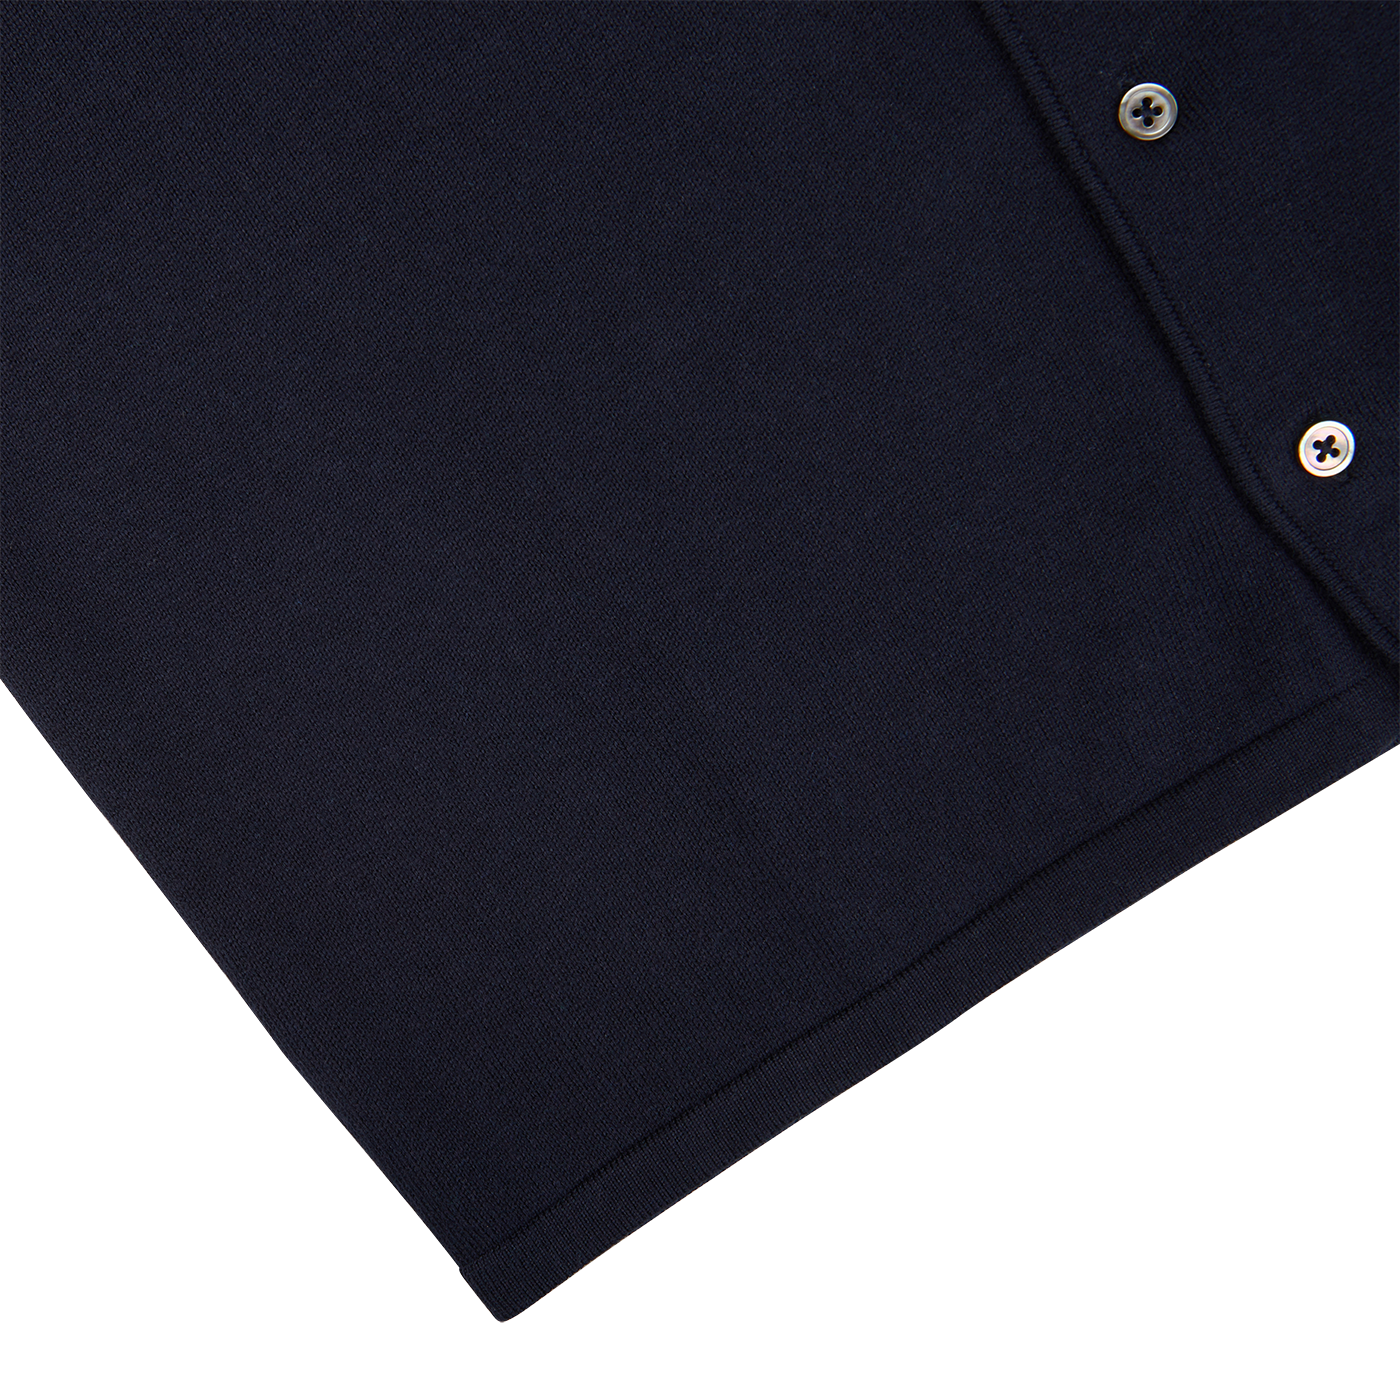 A close up of an Alan Paine navy blue luxury cotton knitted overshirt with buttons.